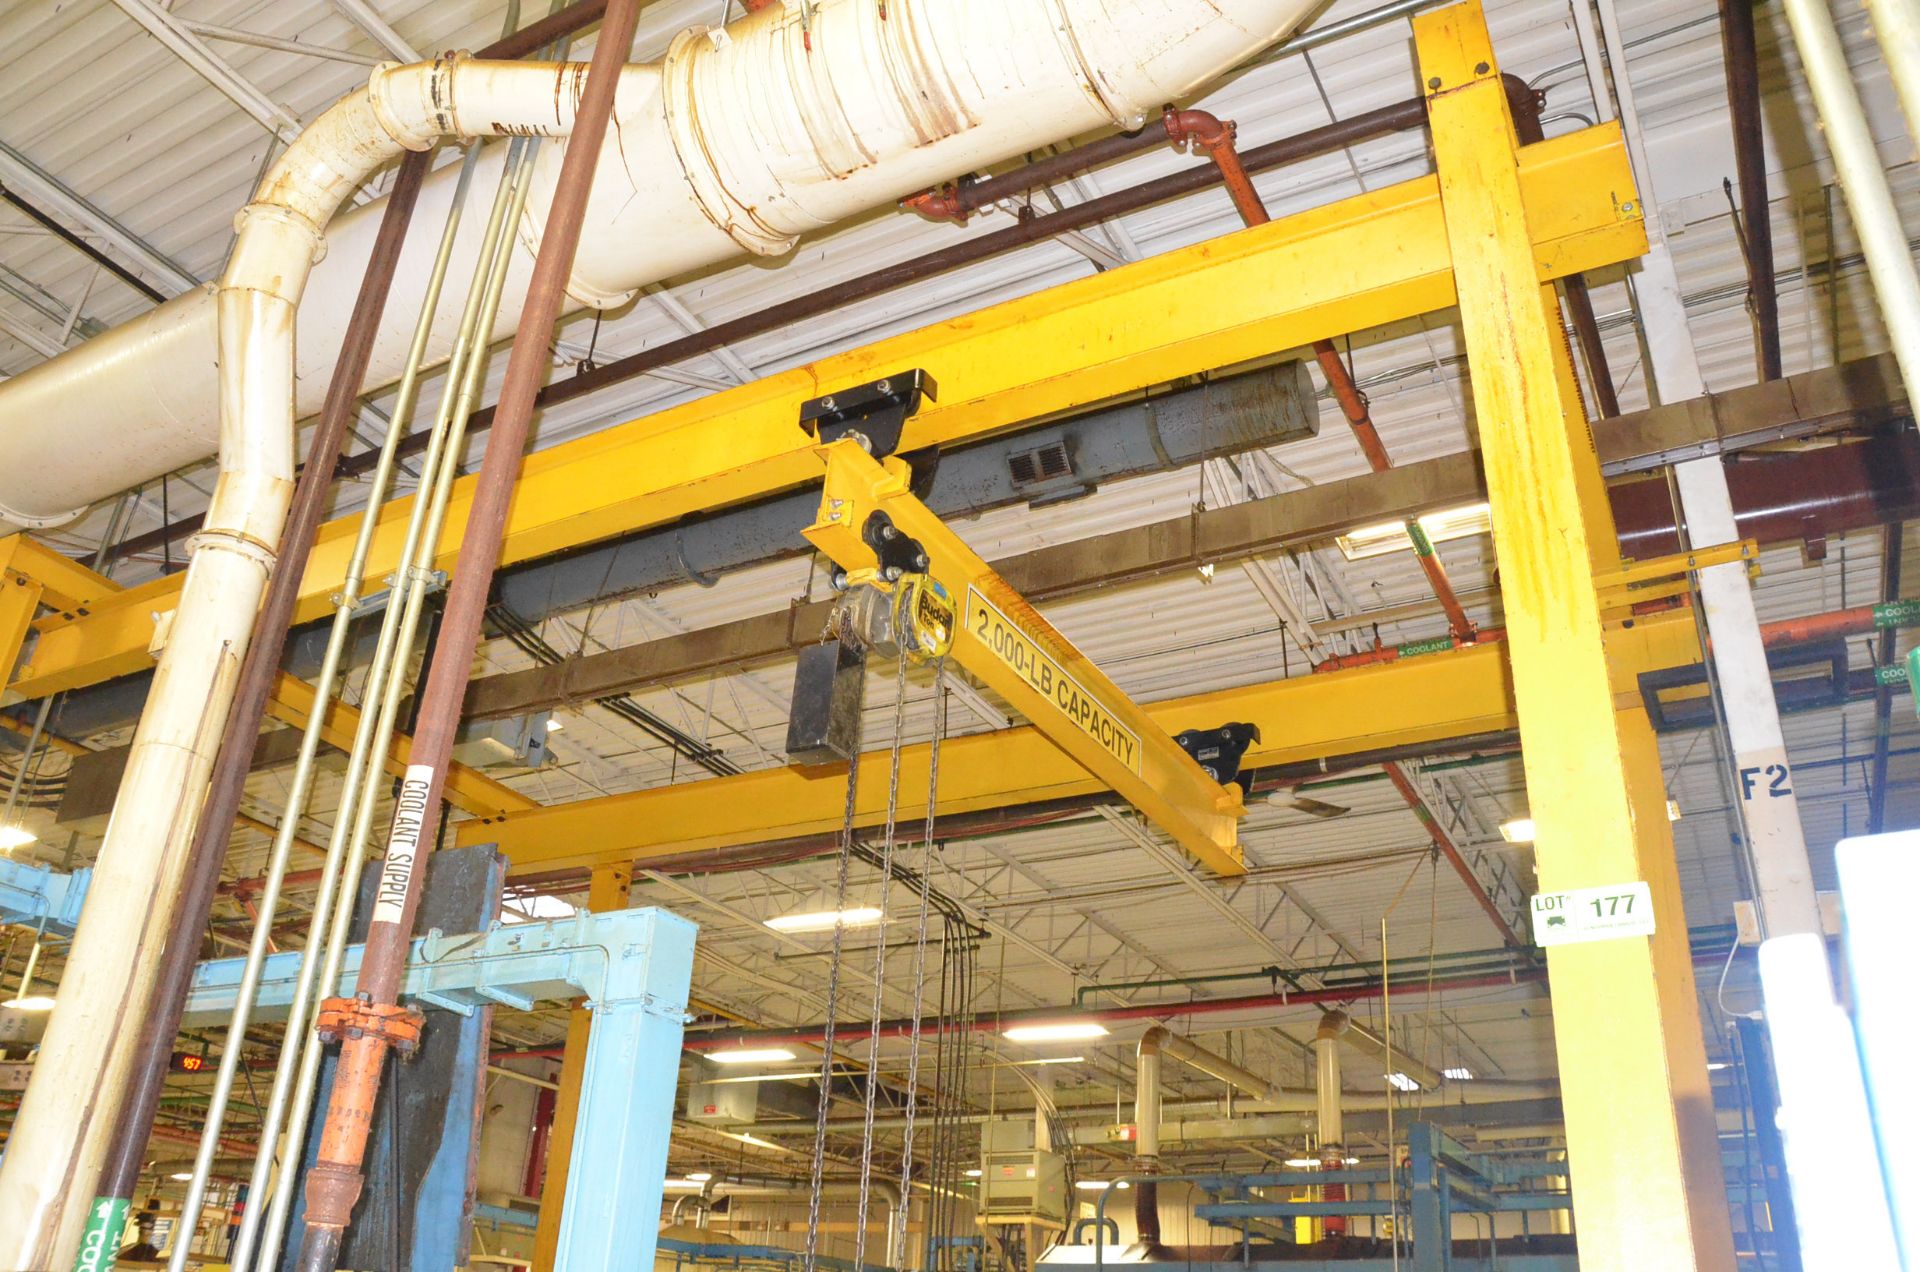 MFG UNKNOWN 2,000 LBS CAPACITY FREESTANDING GANTRY CRANE SYSTEM WITH APPROX 140" SPAN, 160"